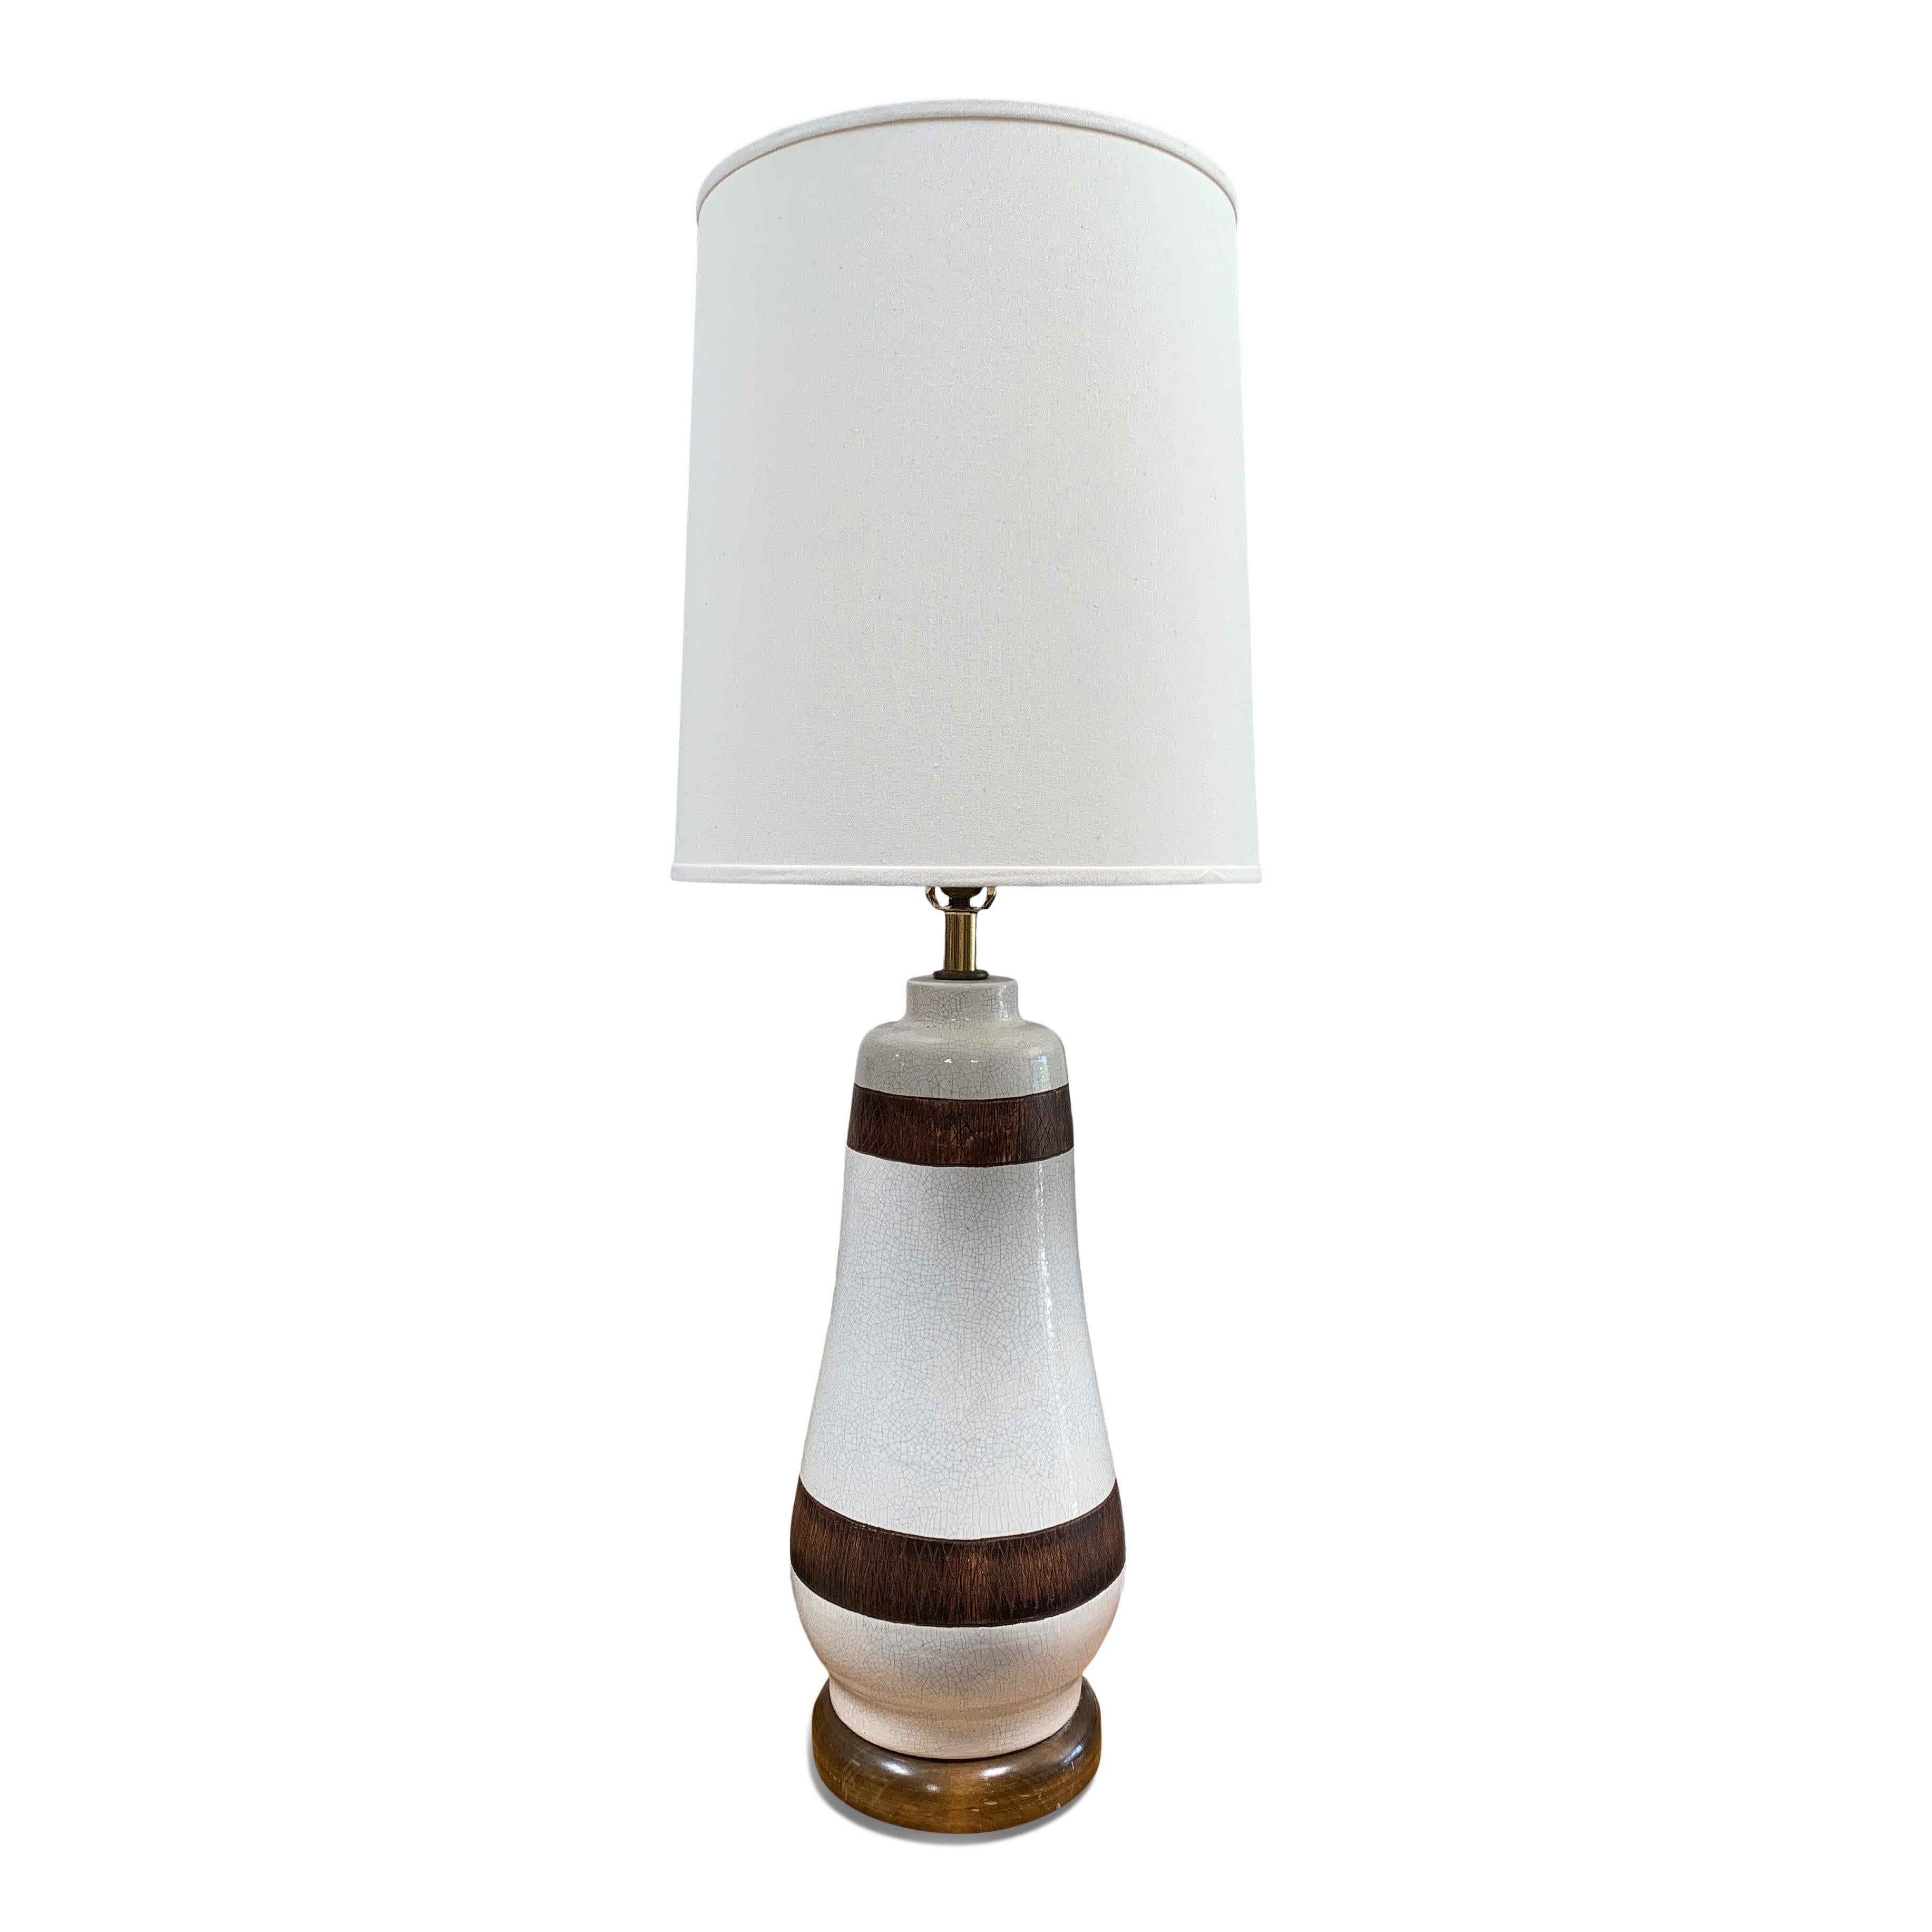 Mid-century table lamp. Vintage ceramic base with walnut wooden accents. Newly manufactured linen shade. 

Overall dimensions:
8